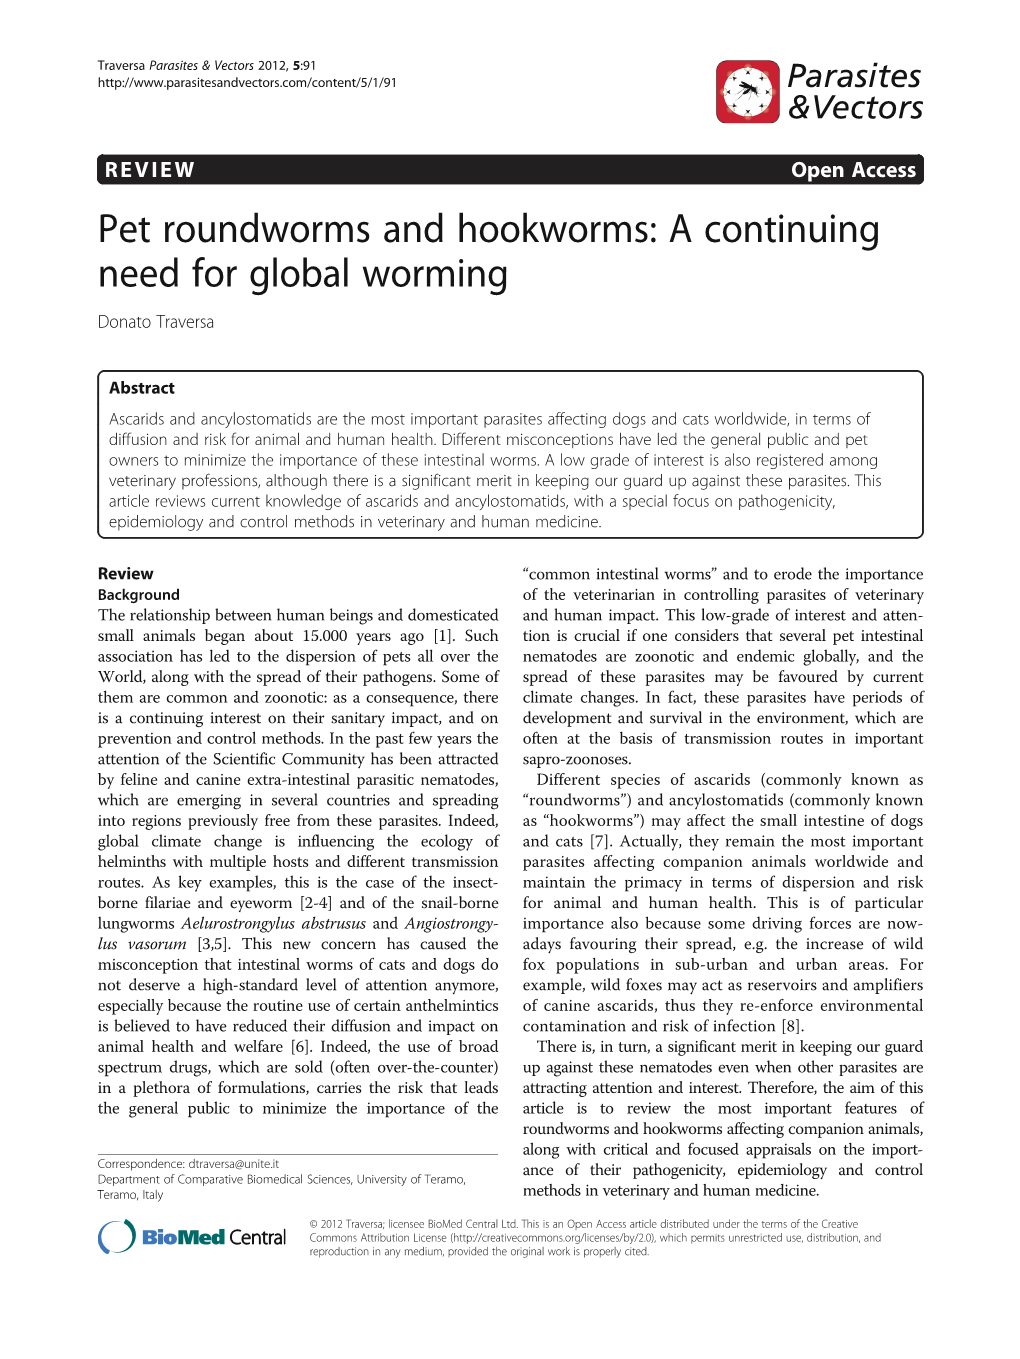 Pet Roundworms and Hookworms: a Continuing Need for Global Worming Donato Traversa